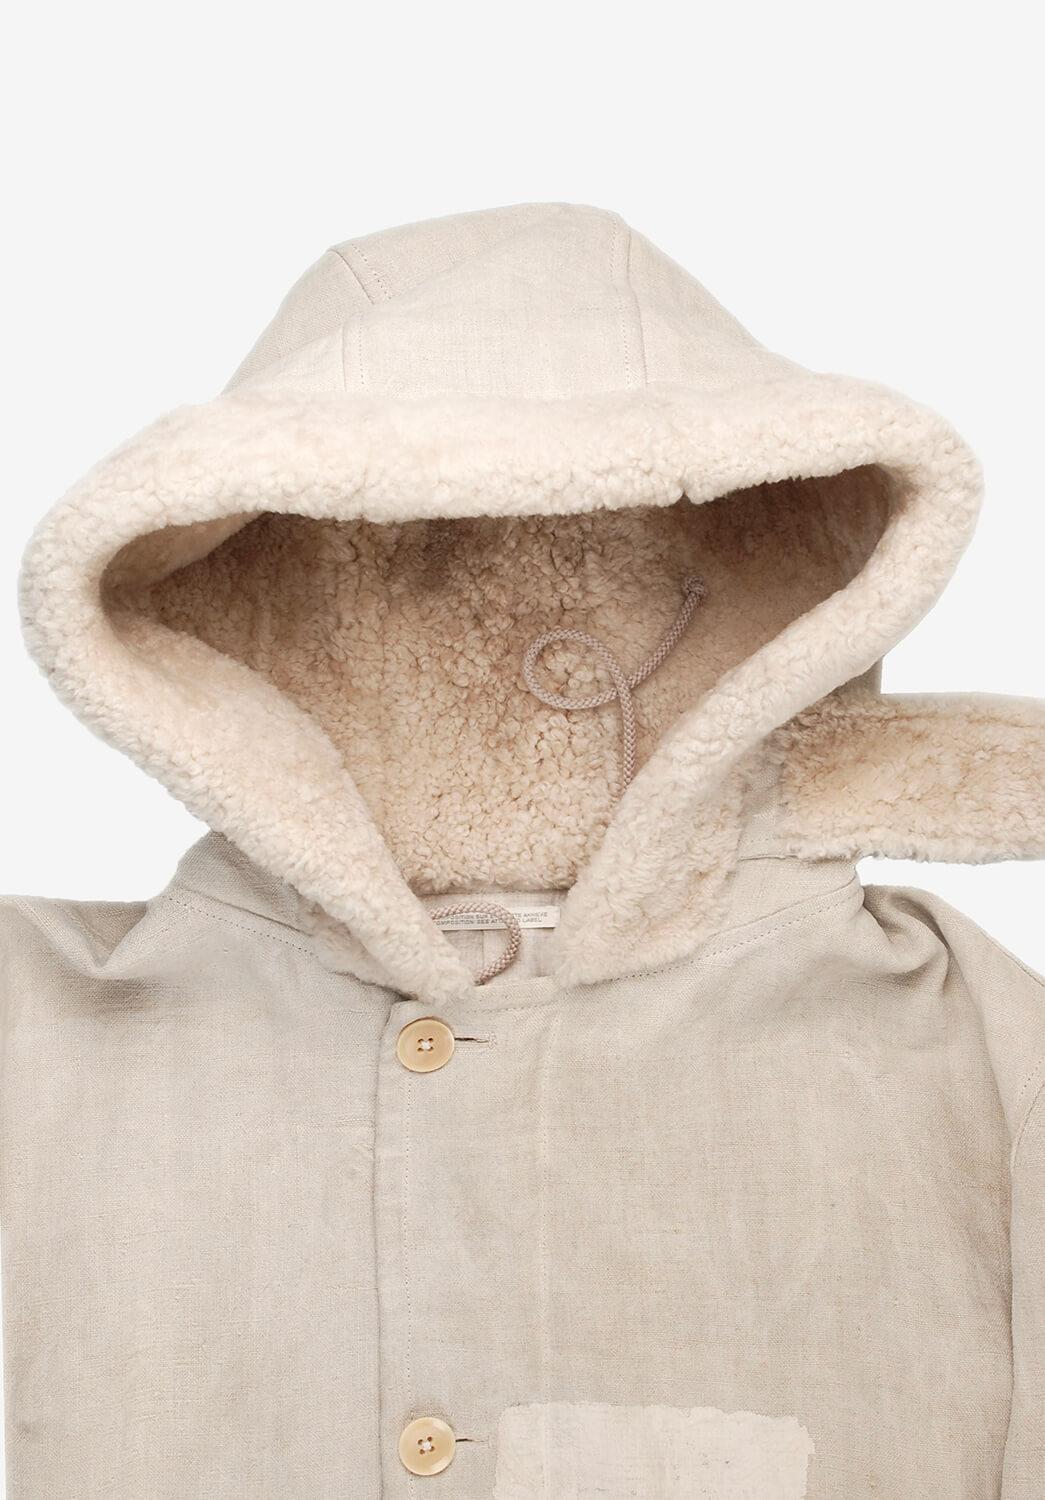 Item for sale is 100% genuine Yohji Yamamoto Pour Homme Painter Parka
Color: Beige
(An actual color may a bit vary due to individual computer screen interpretation)
Material: 100% linen
Tag size: 3 runs XL at most 
This coat is great quality item.